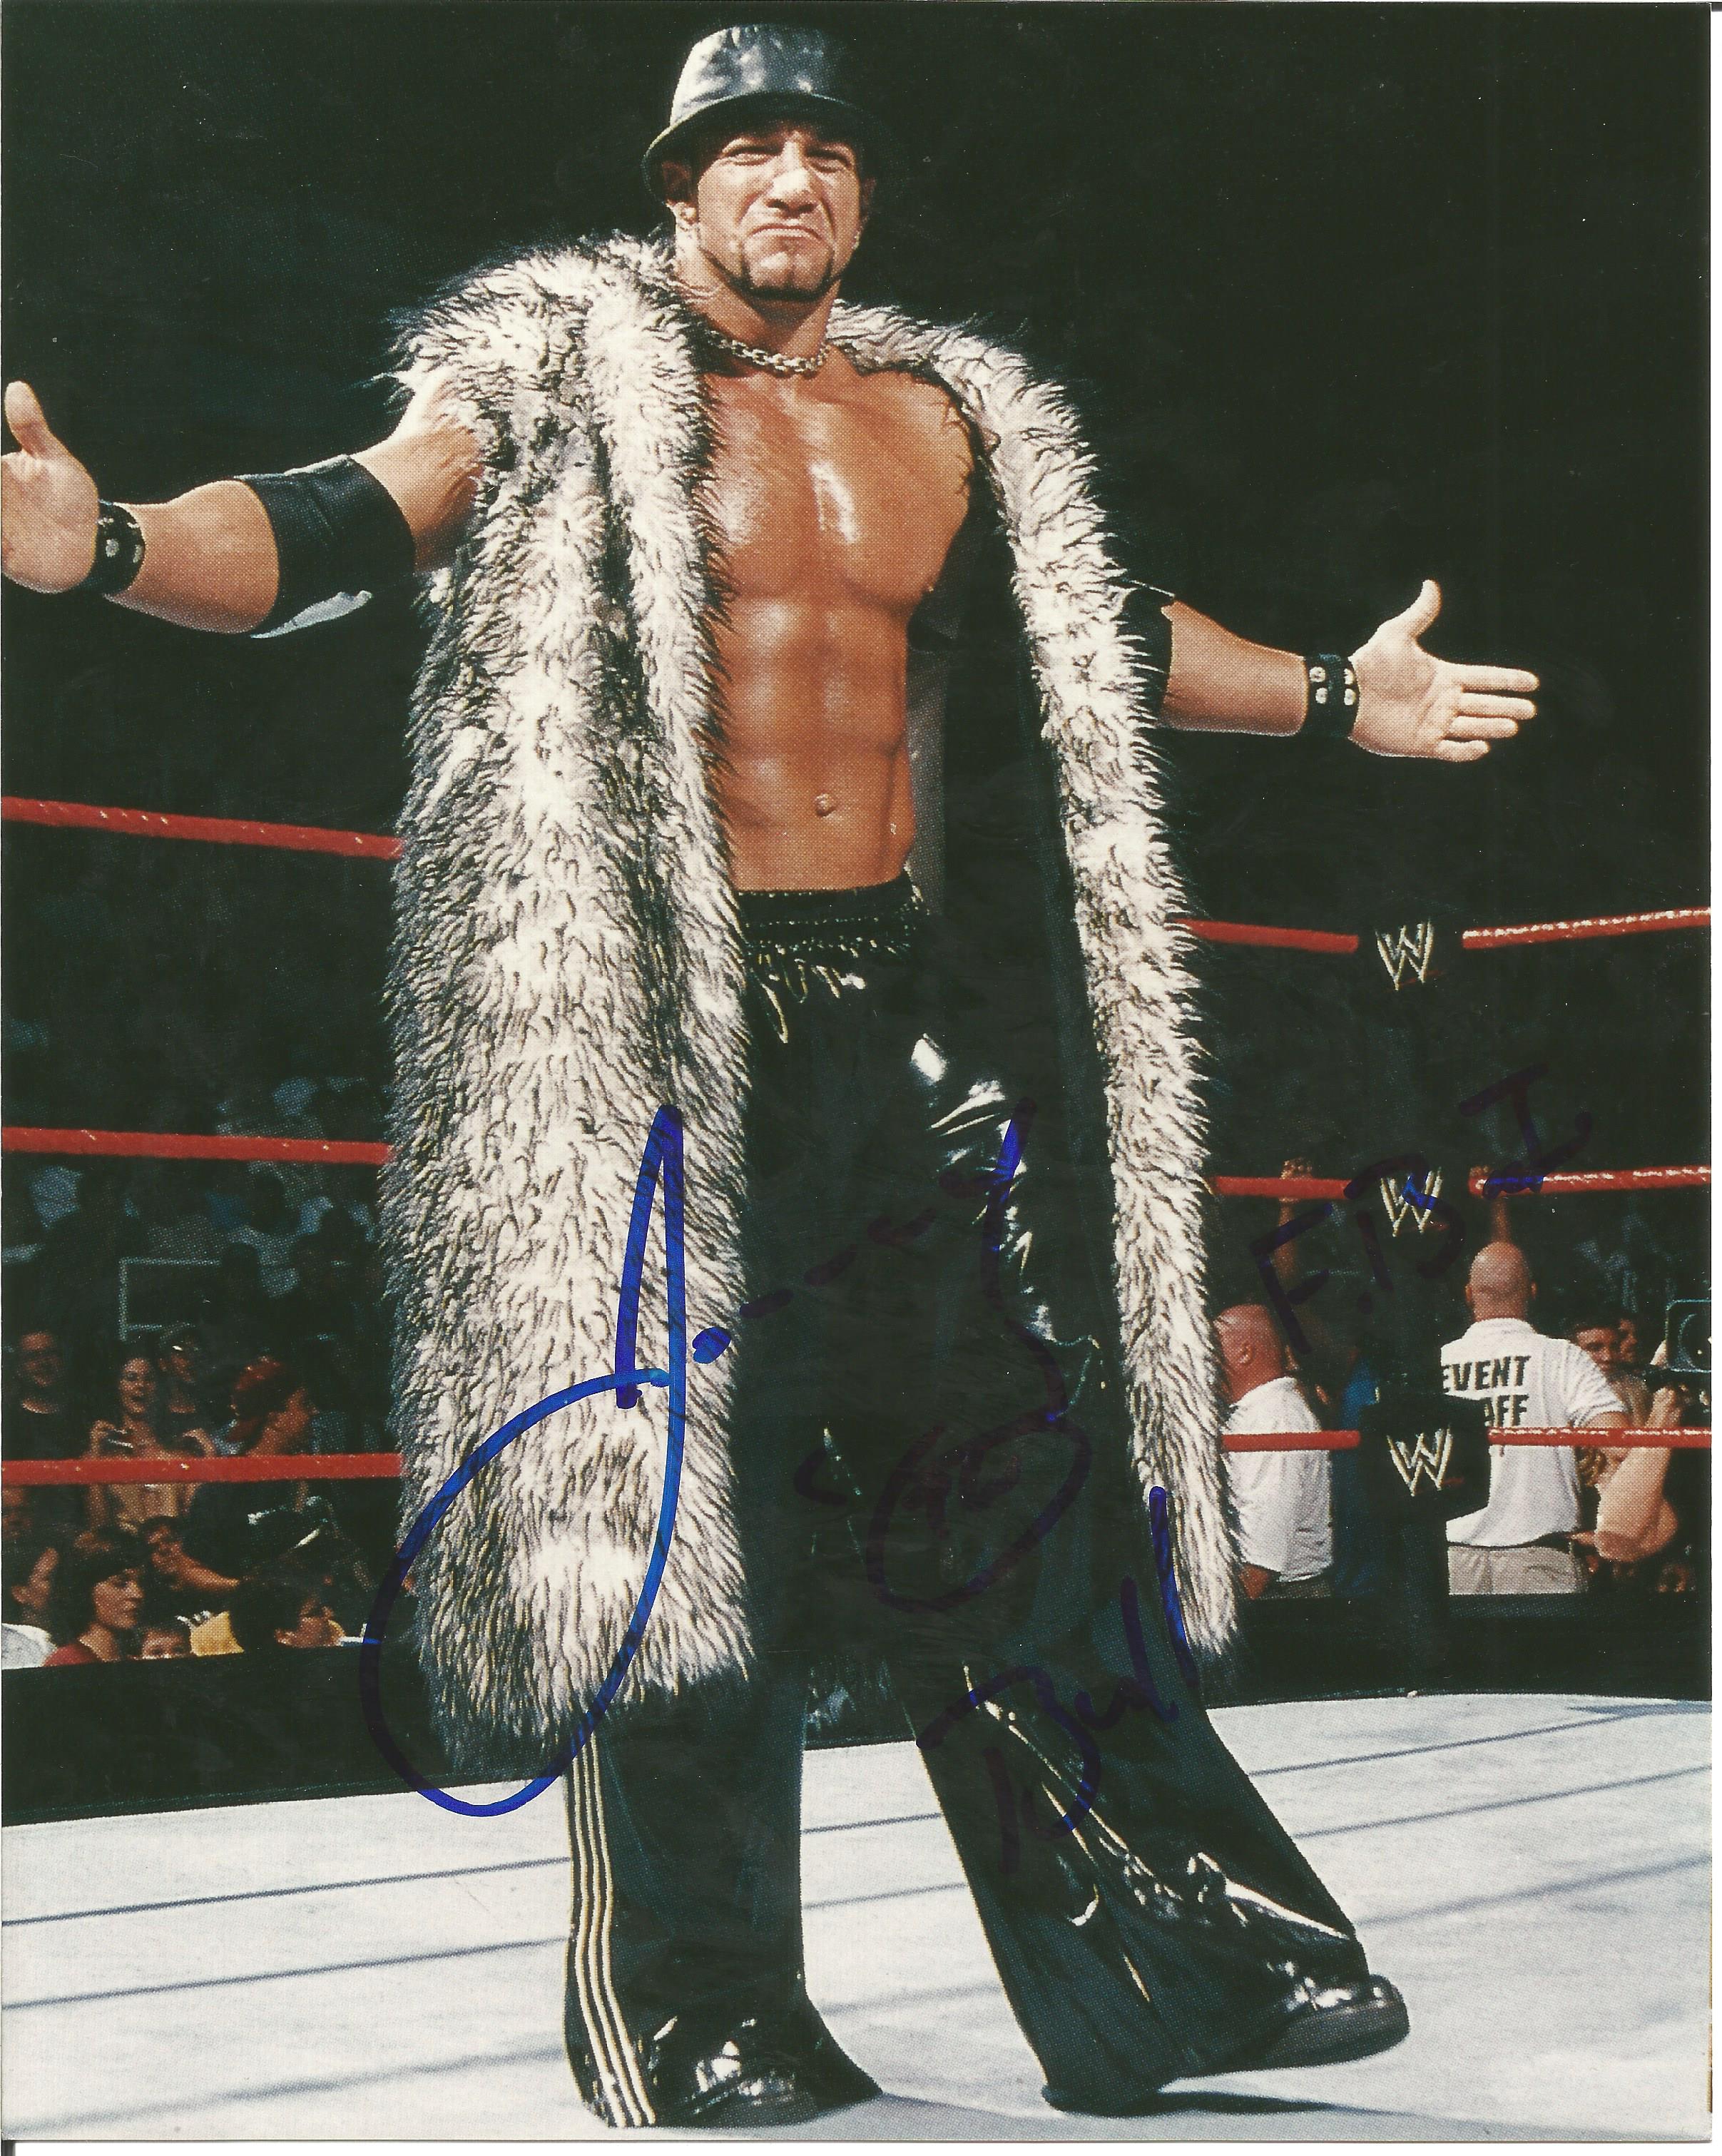 Johnny Stamboli Signed Wwe Wrestling 8 x 10 inch Photo. Good Condition. All signed pieces come